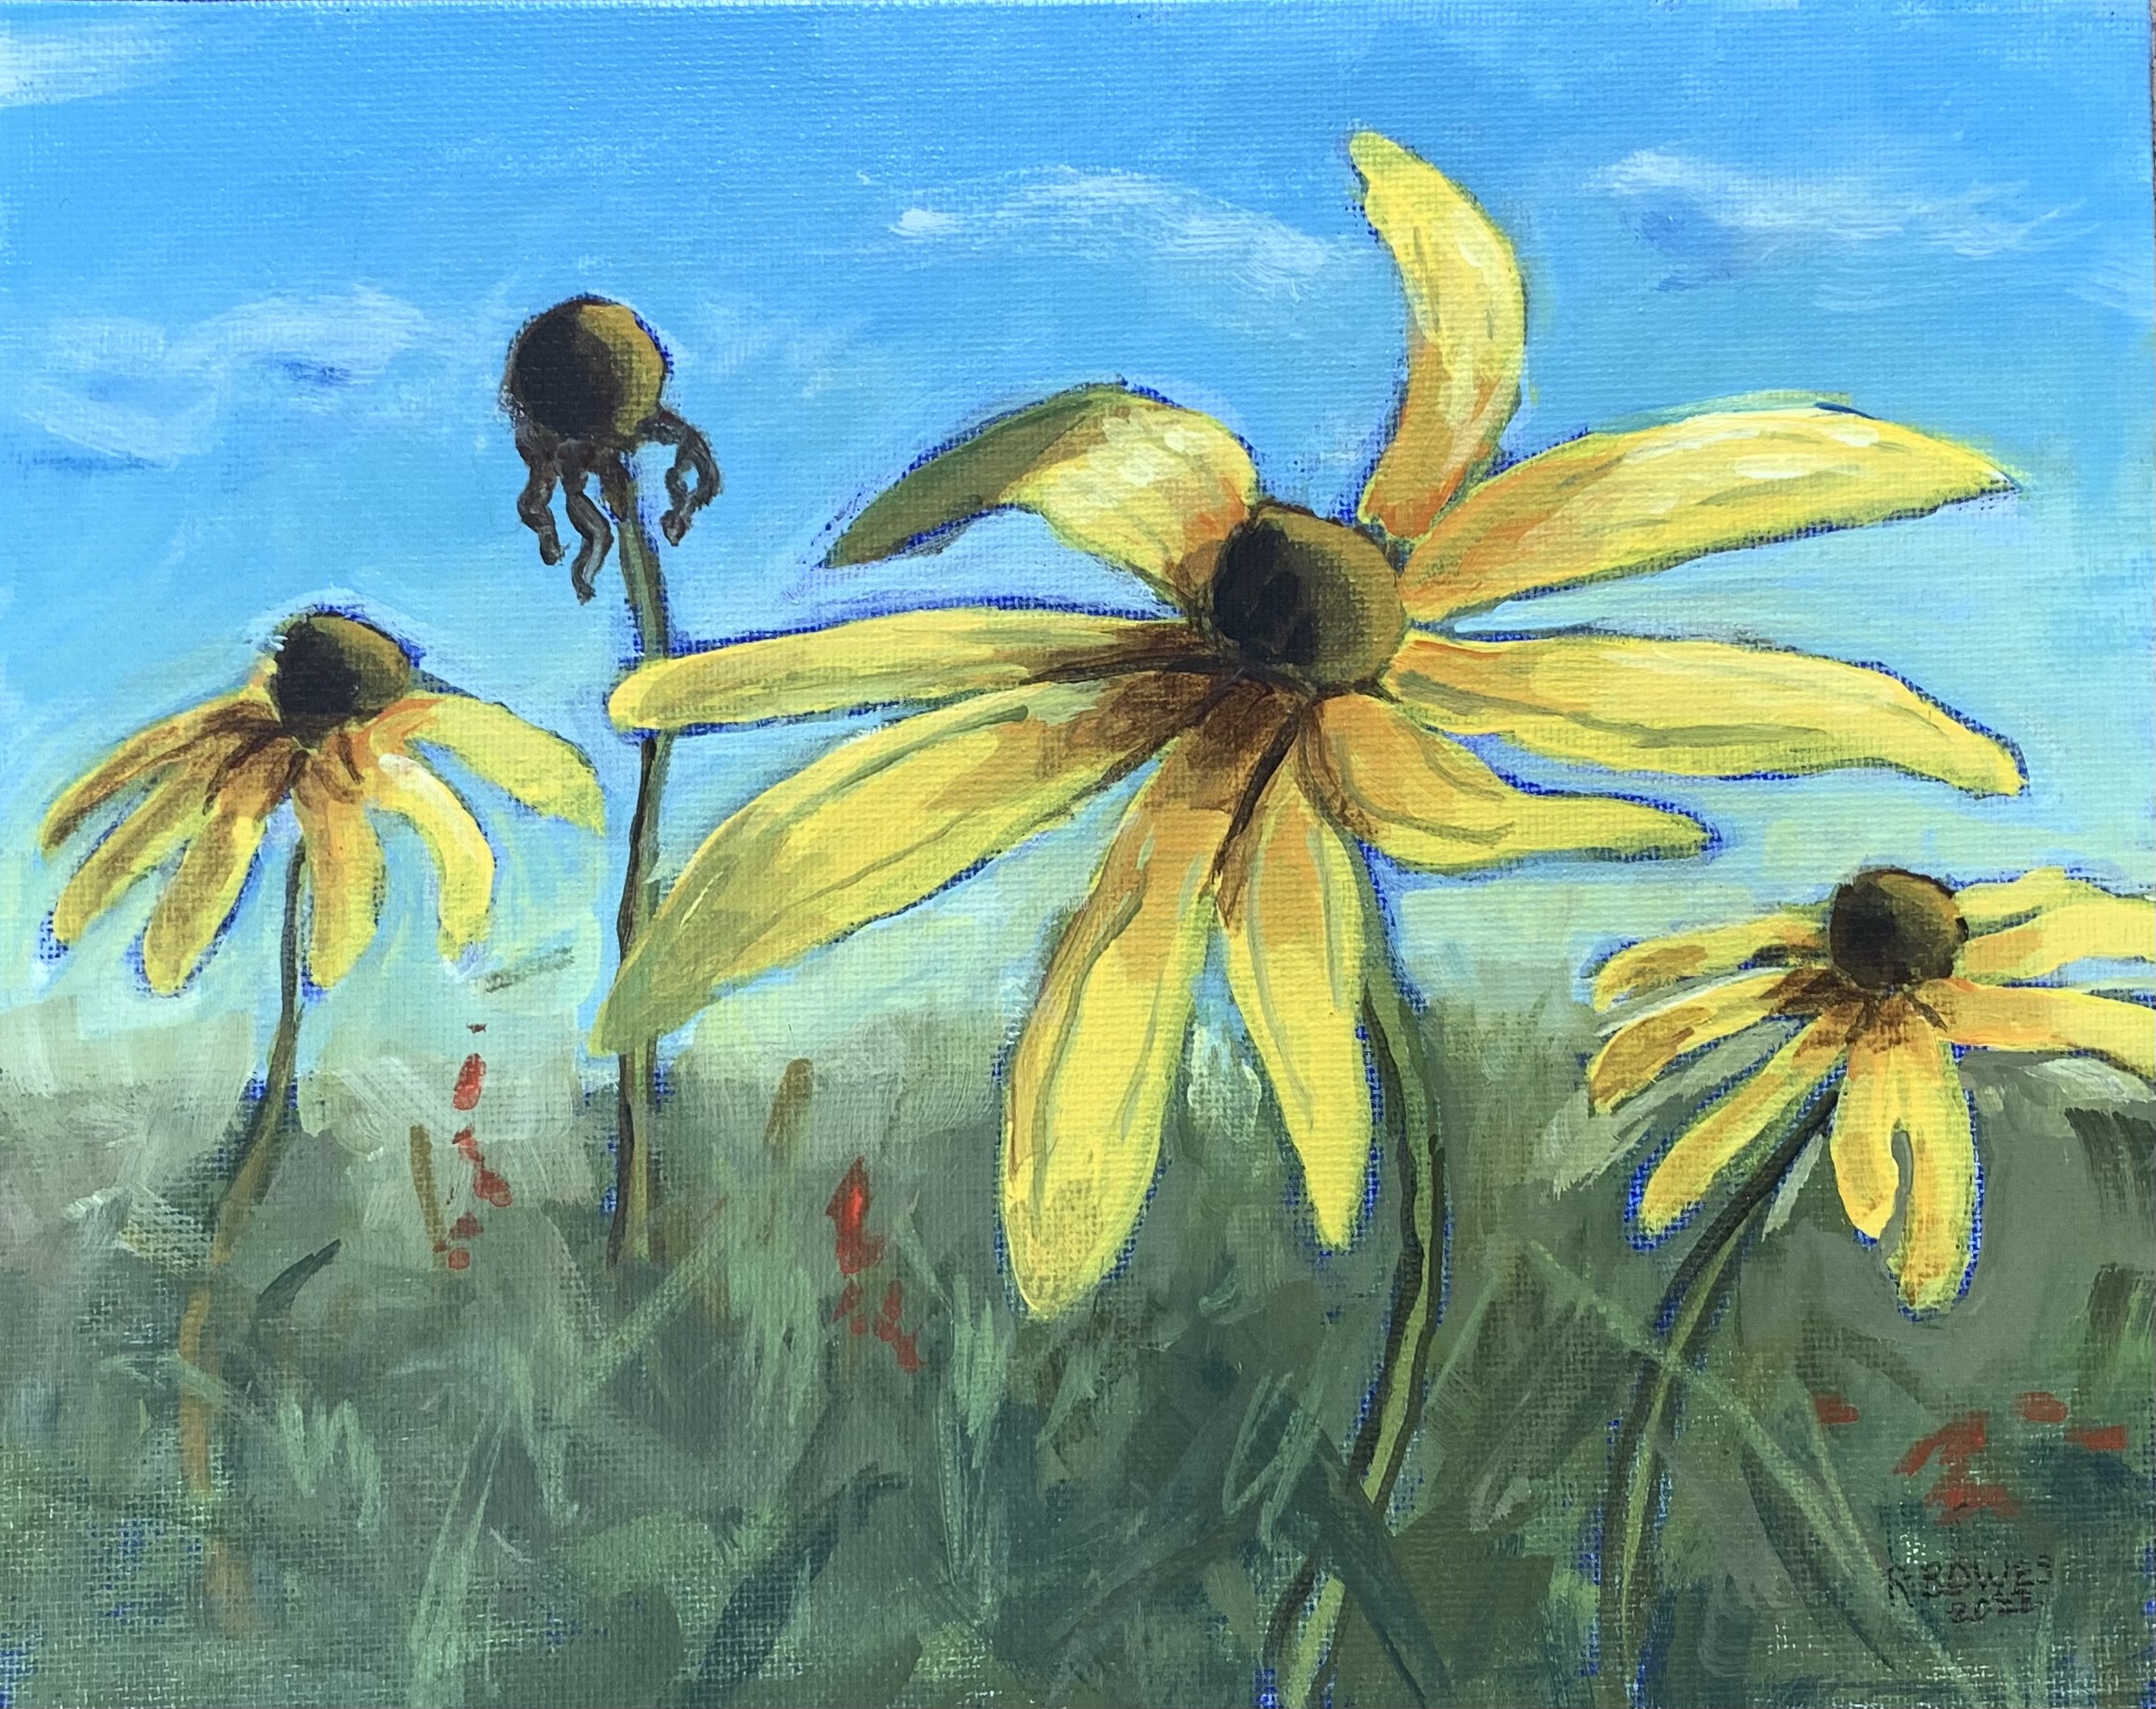 Rudbeckia, acrylic on canvasboard, 8X10, $40, Rebecca Bowes. The artist has designated 100% of this sale to go to the library fund.